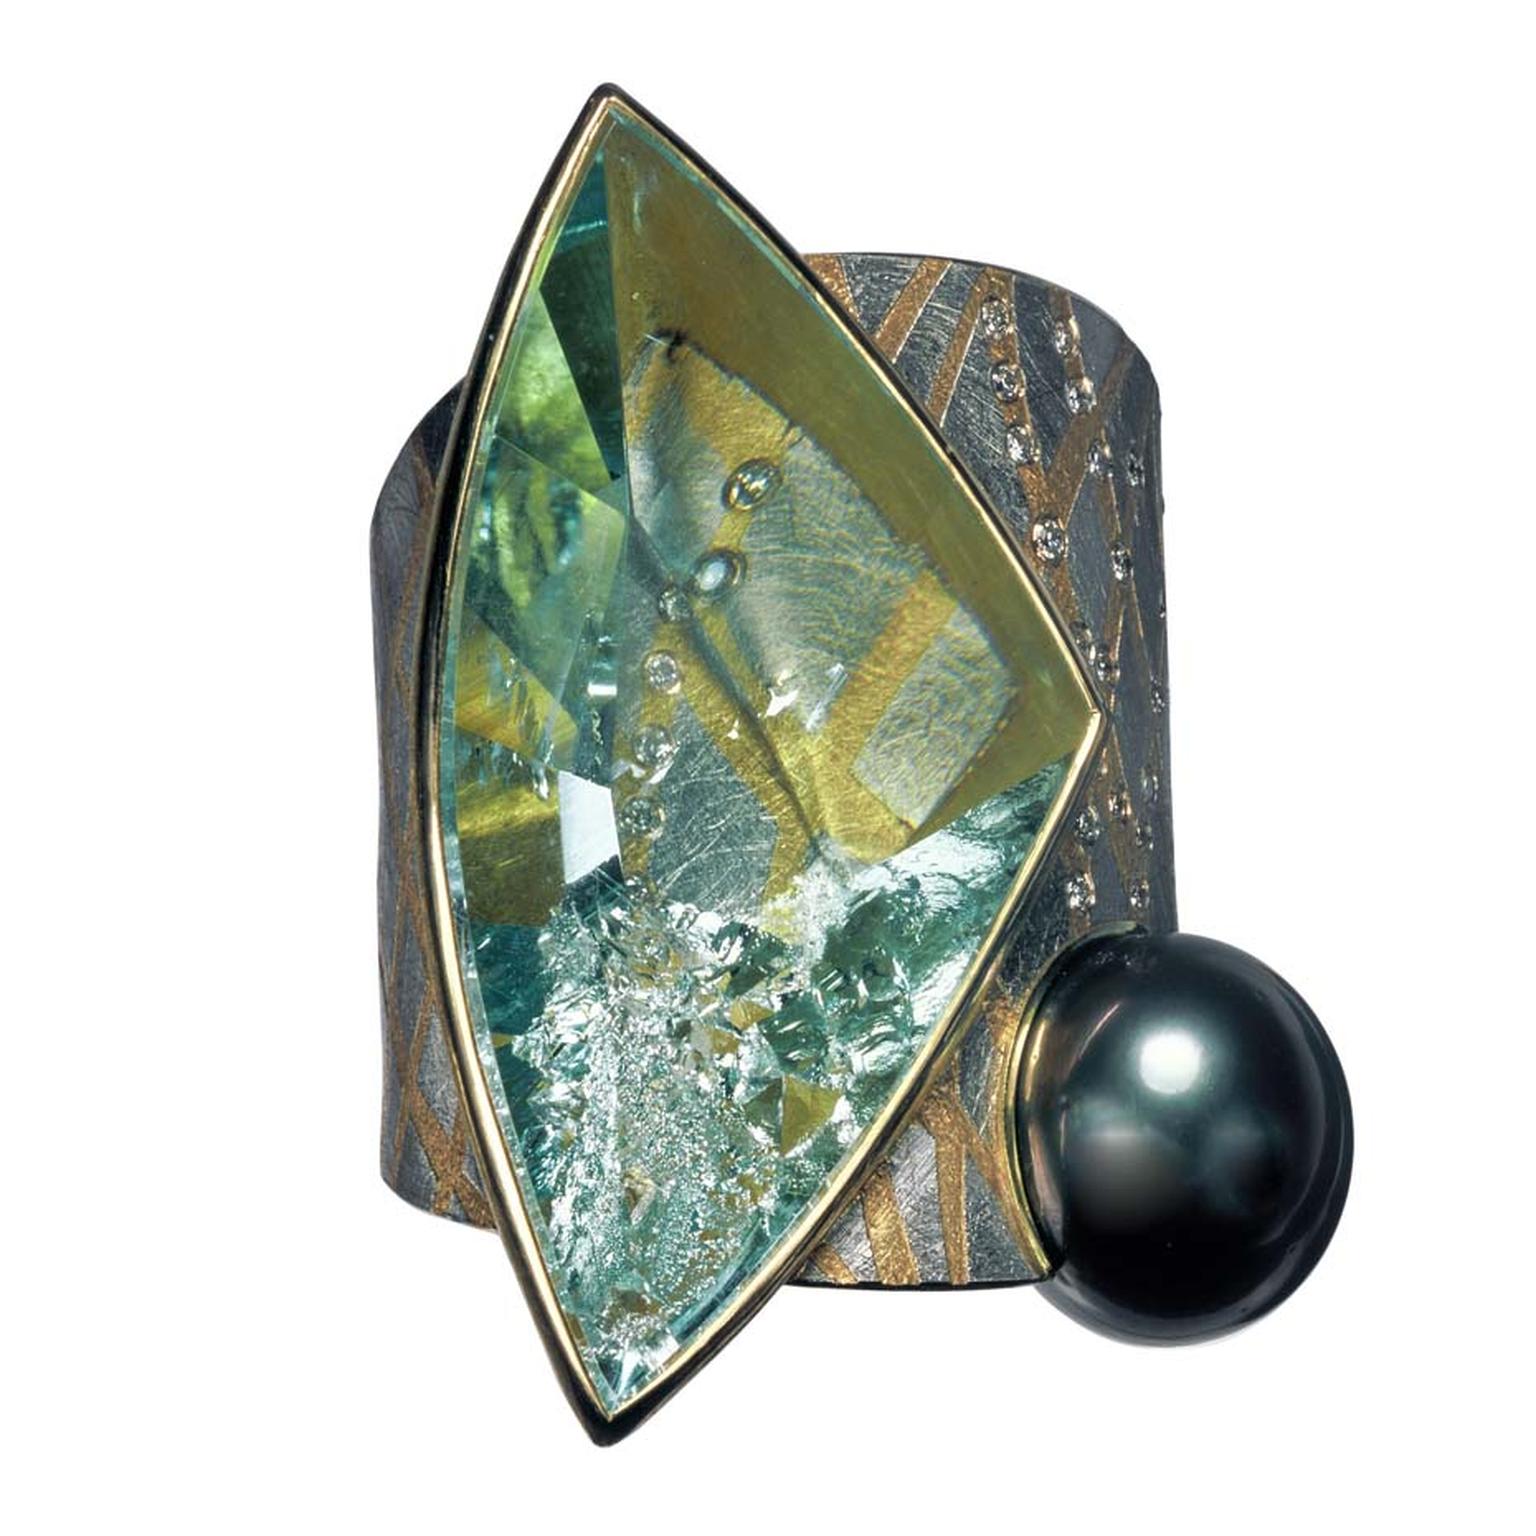 Atelier Zobel ring in platinum and gold, set with an aquamarine, Tahitian pearl and champagne diamonds.